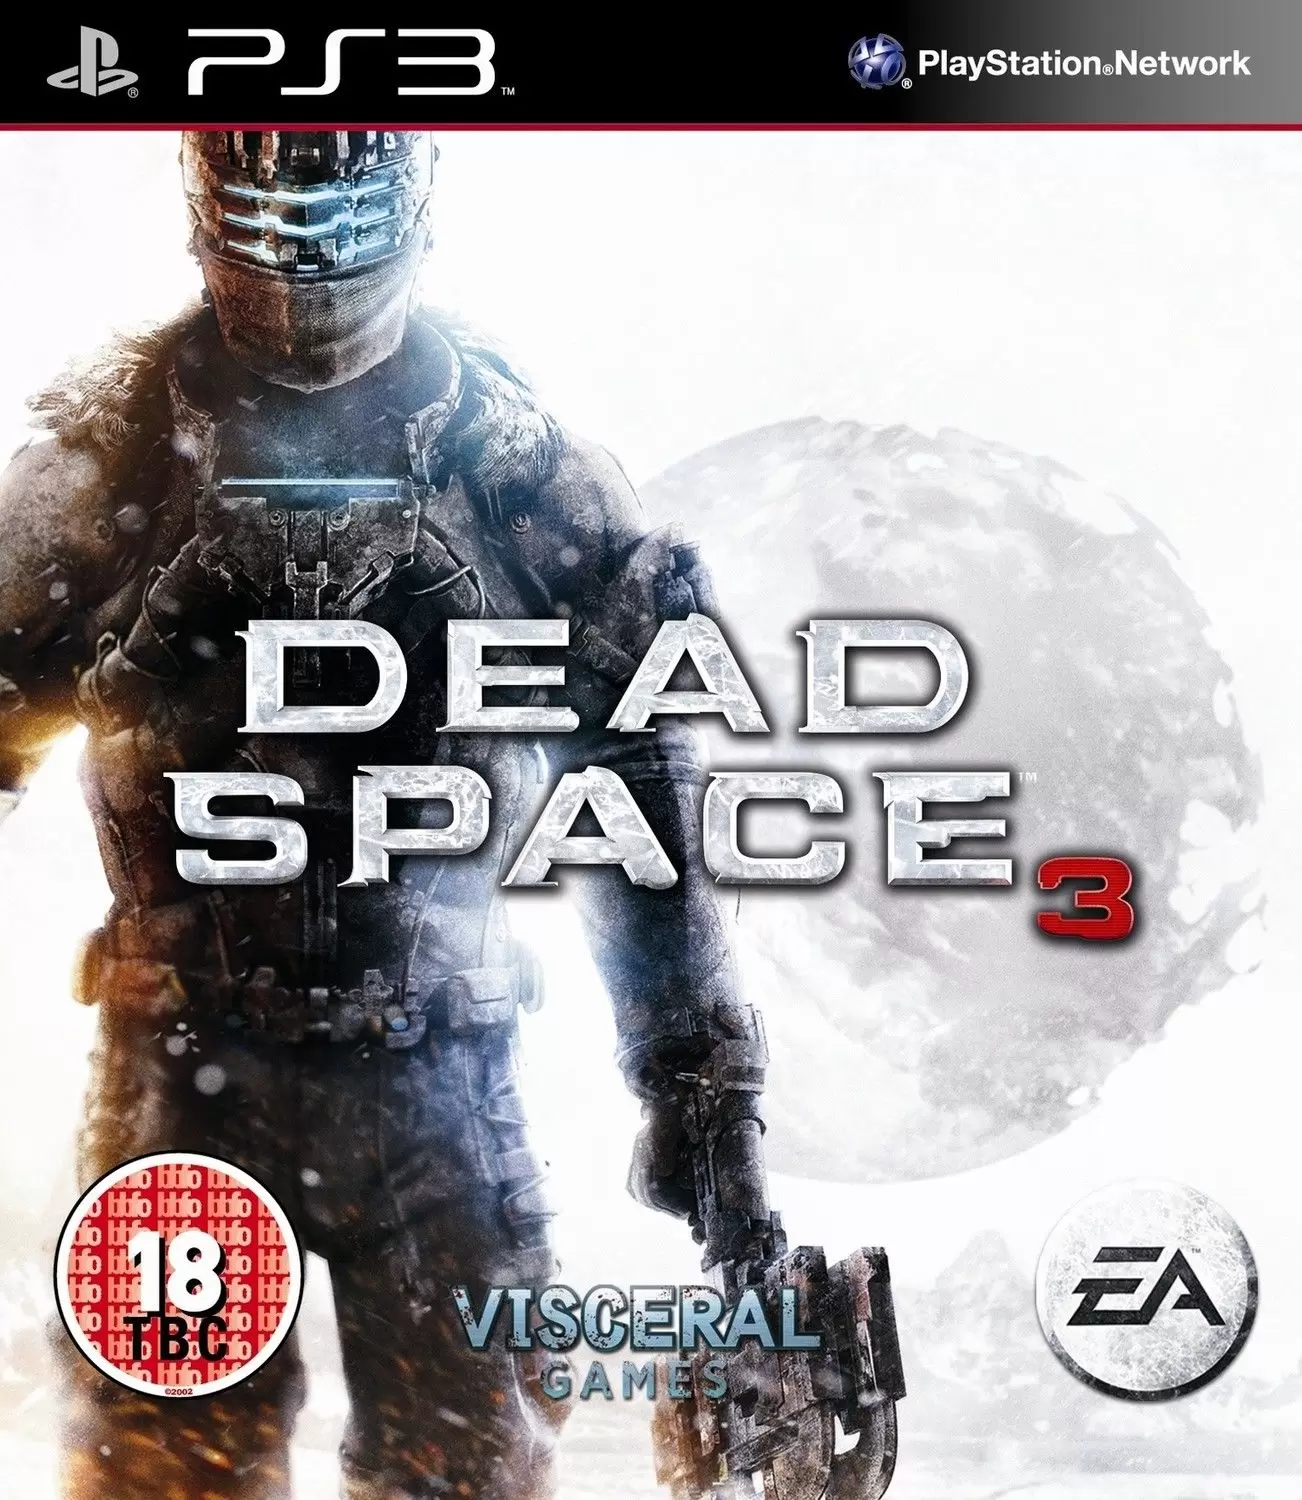 PS3 Games - Dead Space 3